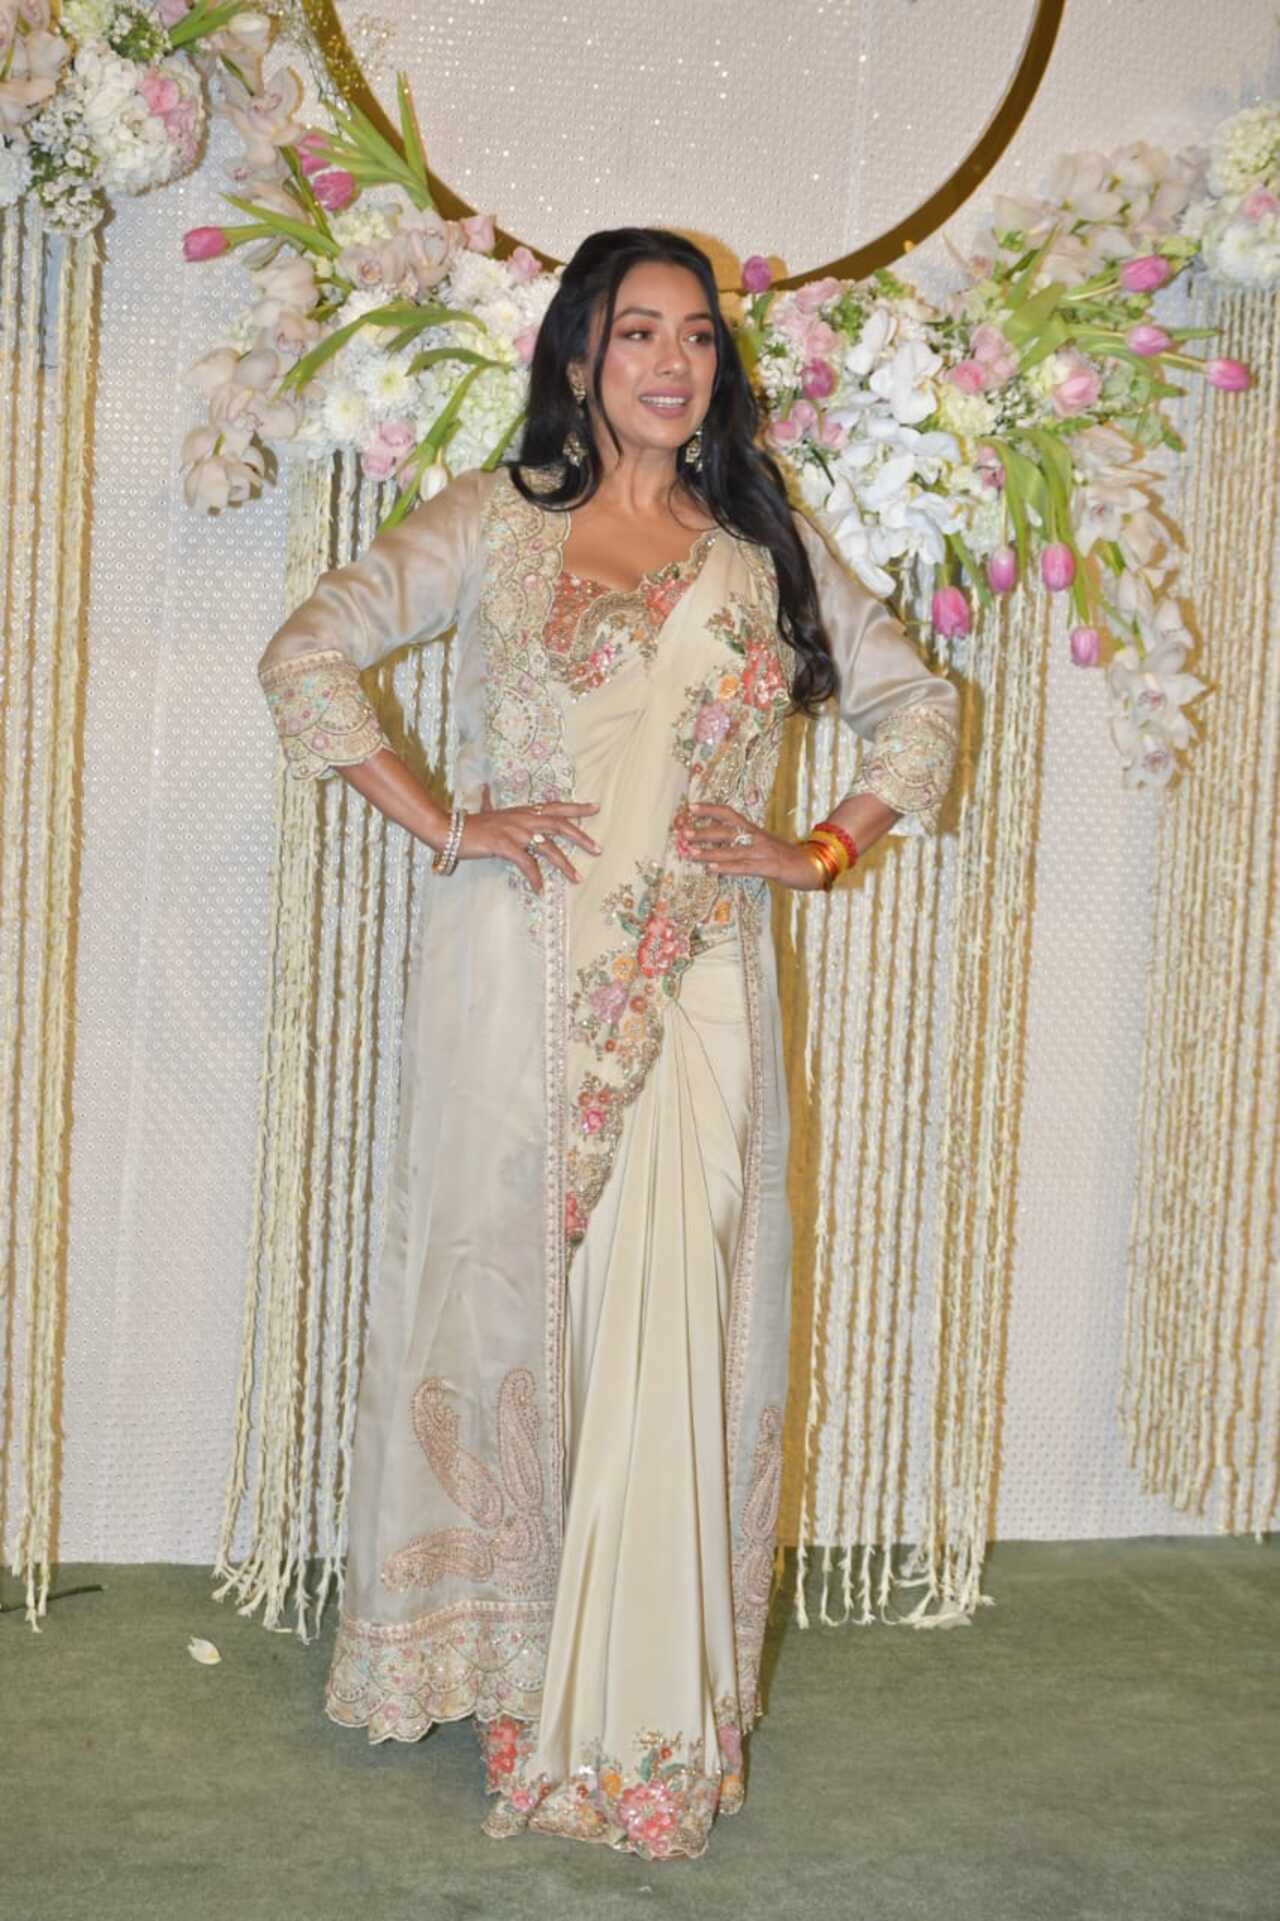 TV's favourite star Rupali Ganguly graced the reception in a gorgeous off-white saree with a cape of matching colour